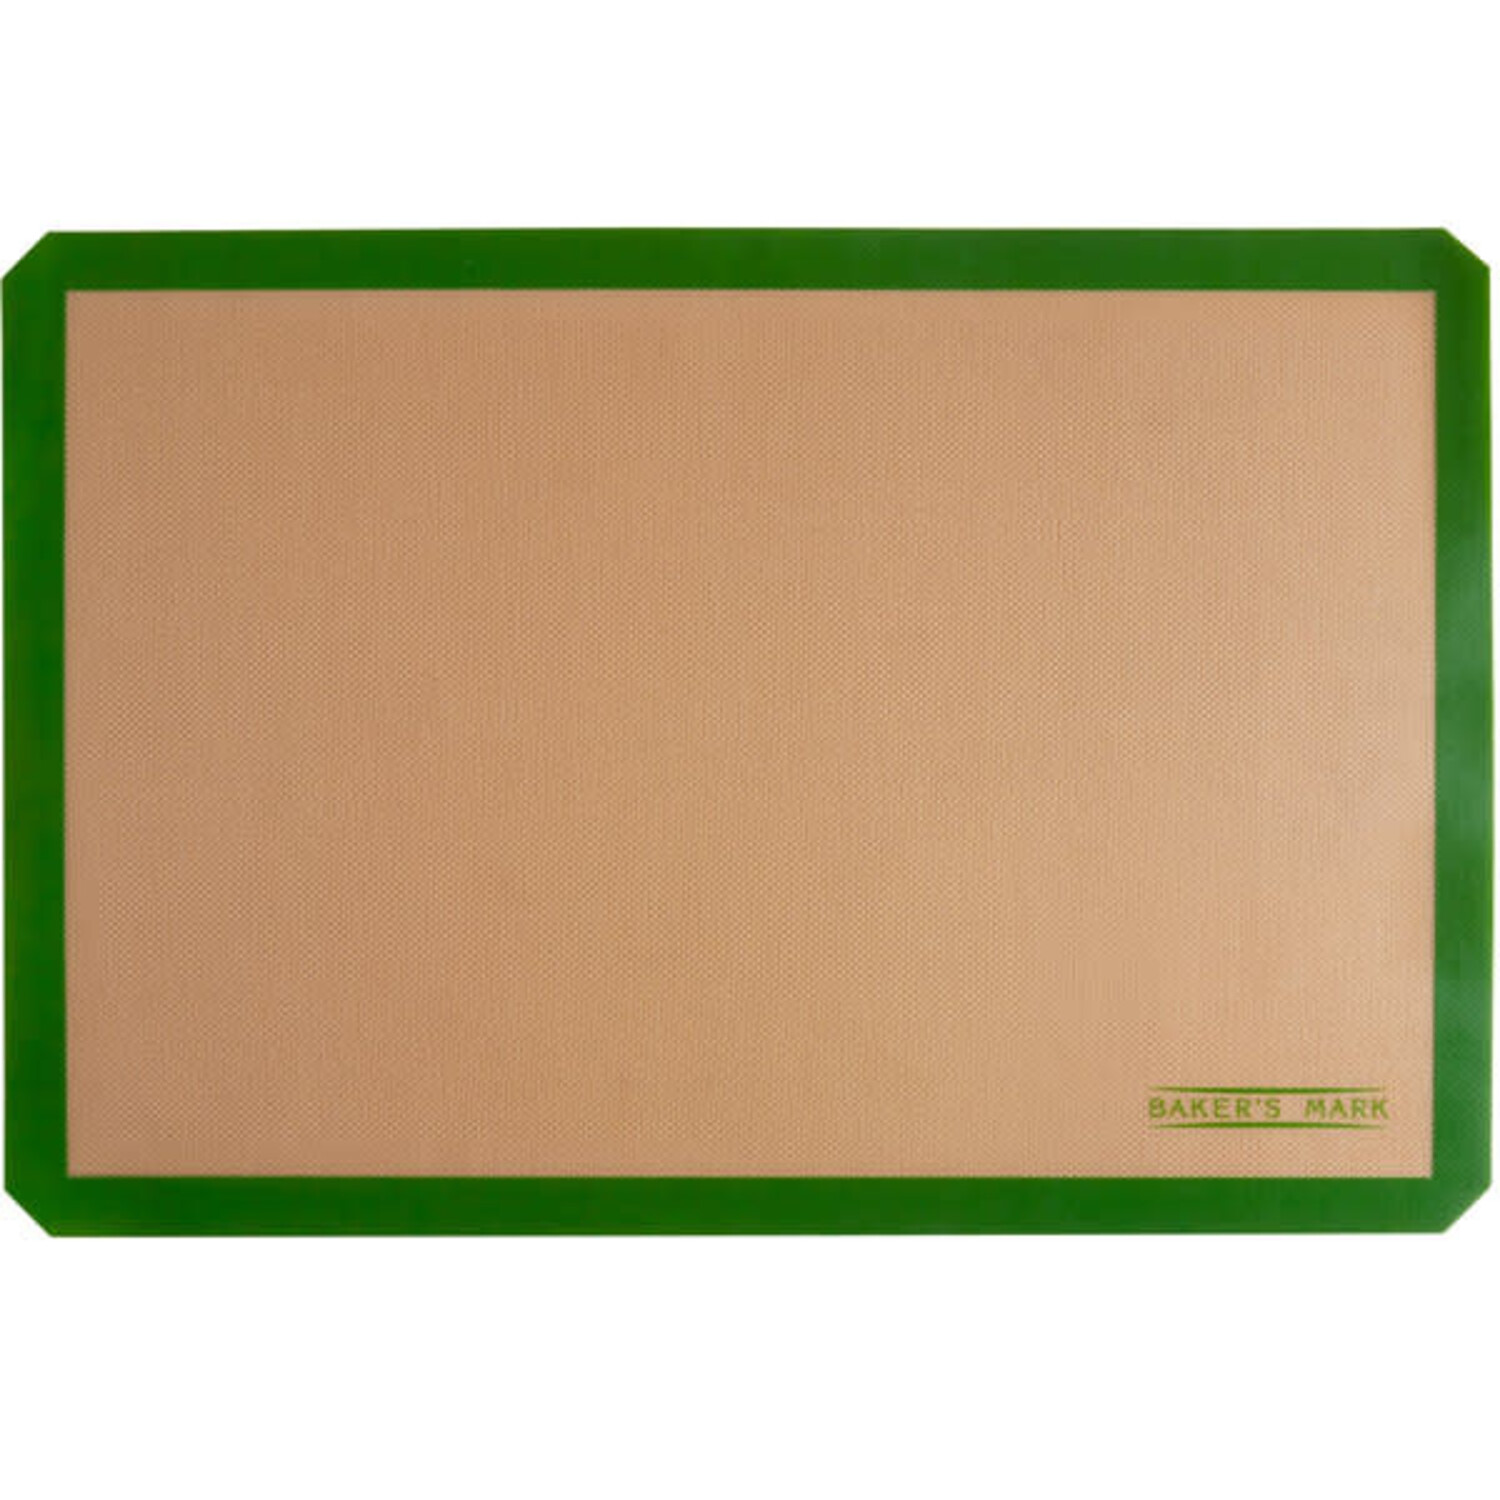 12 x 16 Half Size Heavy Weight Premium Silicone Coated Parchment